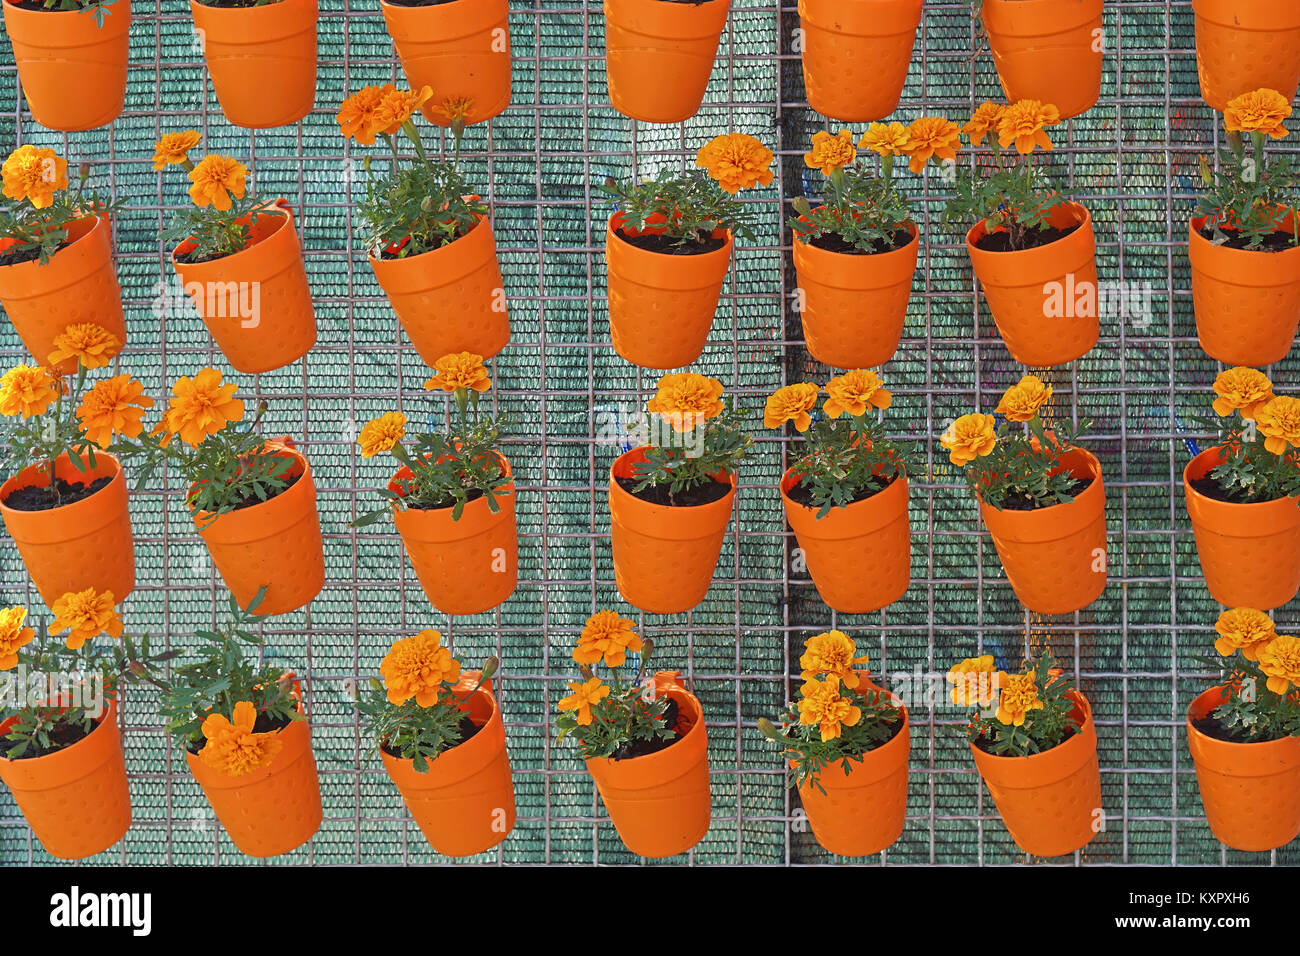 Orange flower pots hanging at wire mesh repetition Stock Photo